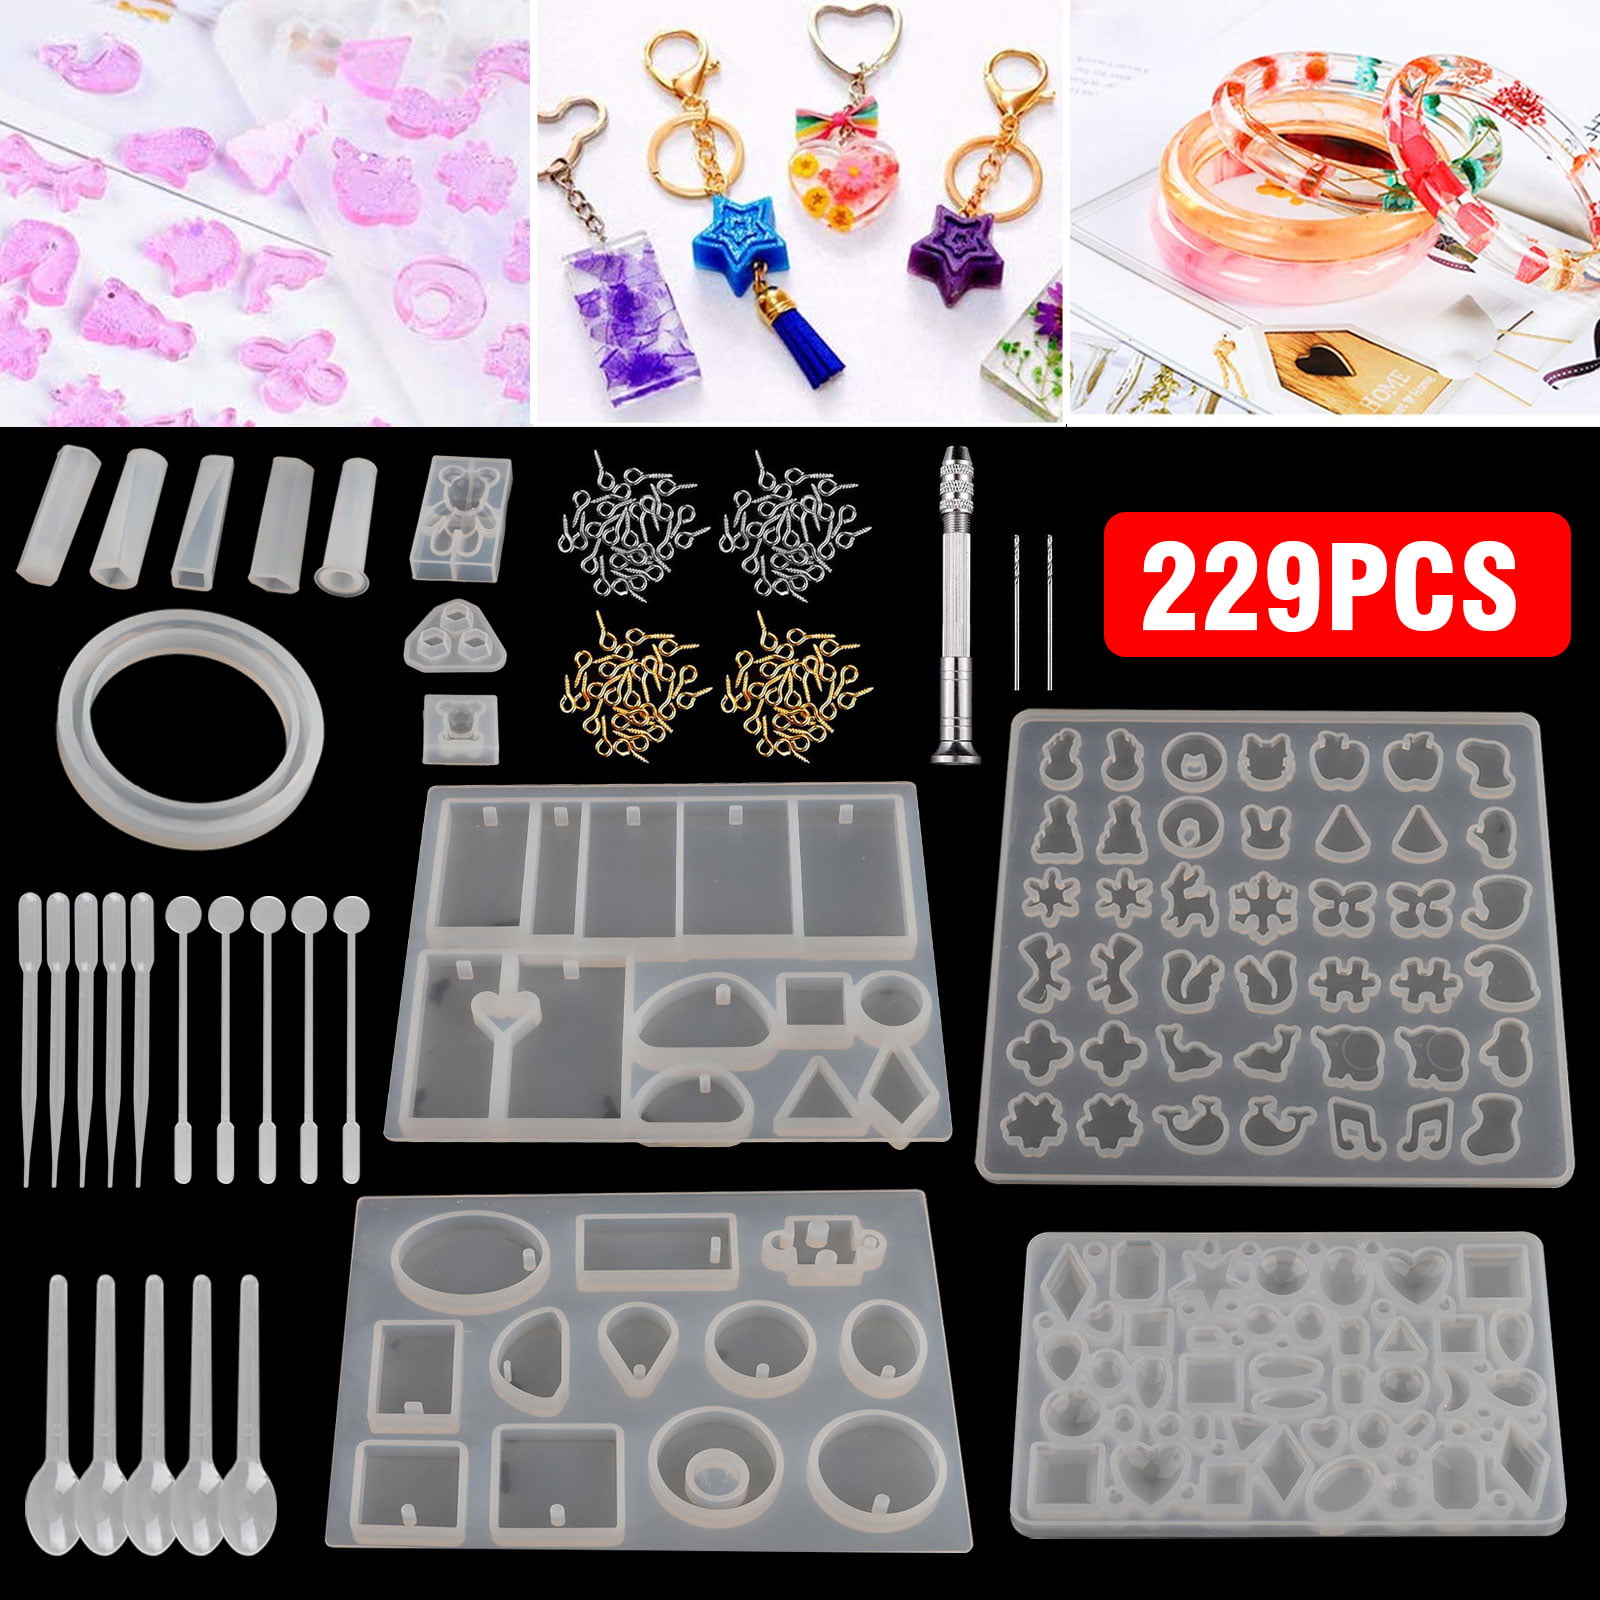 3 Pieces Resin Mold Kit for Rings DIY Jewelry Making and Craft Supplies